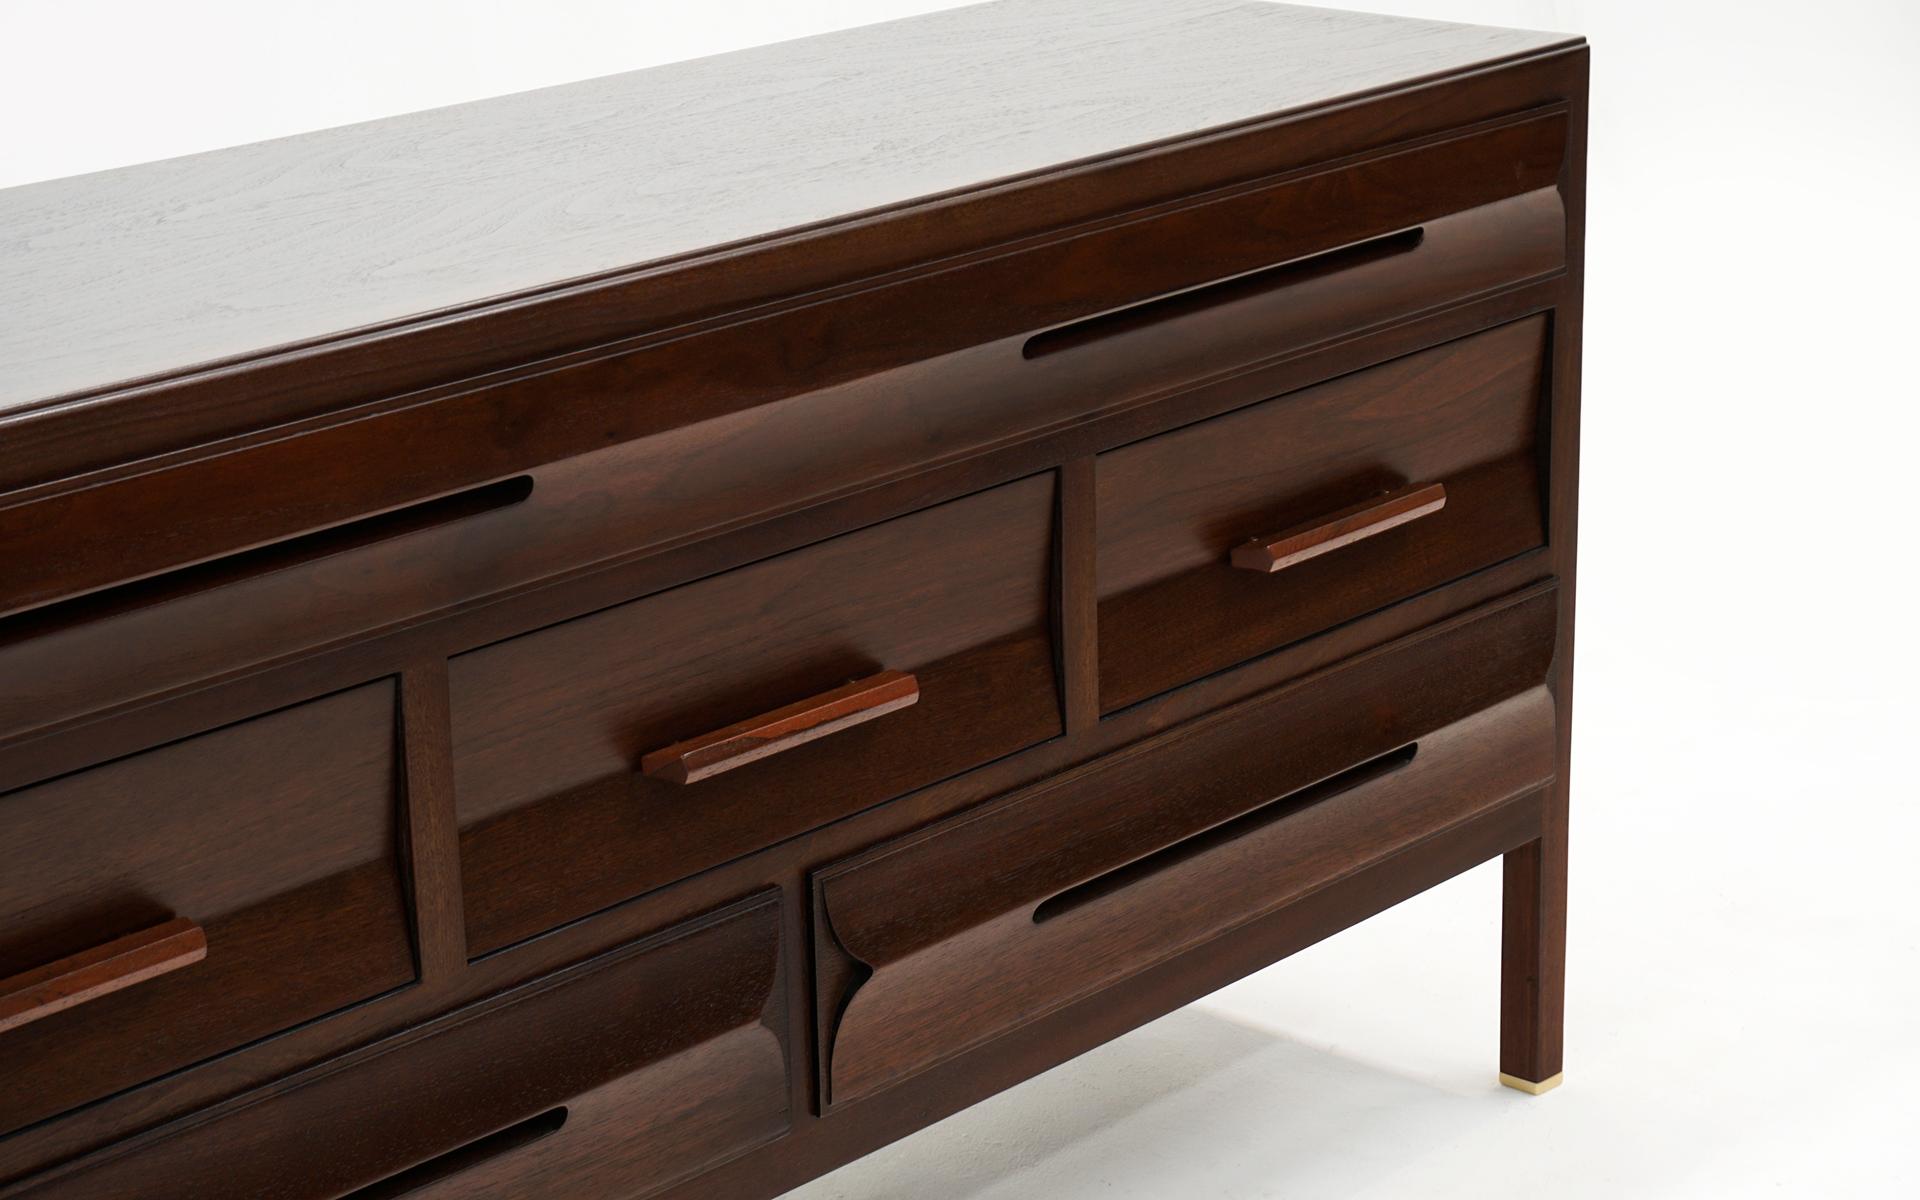 Mid-20th Century Sculptural Dresser in Walnut with Brass Accents by Edward Wormley for Dunbar